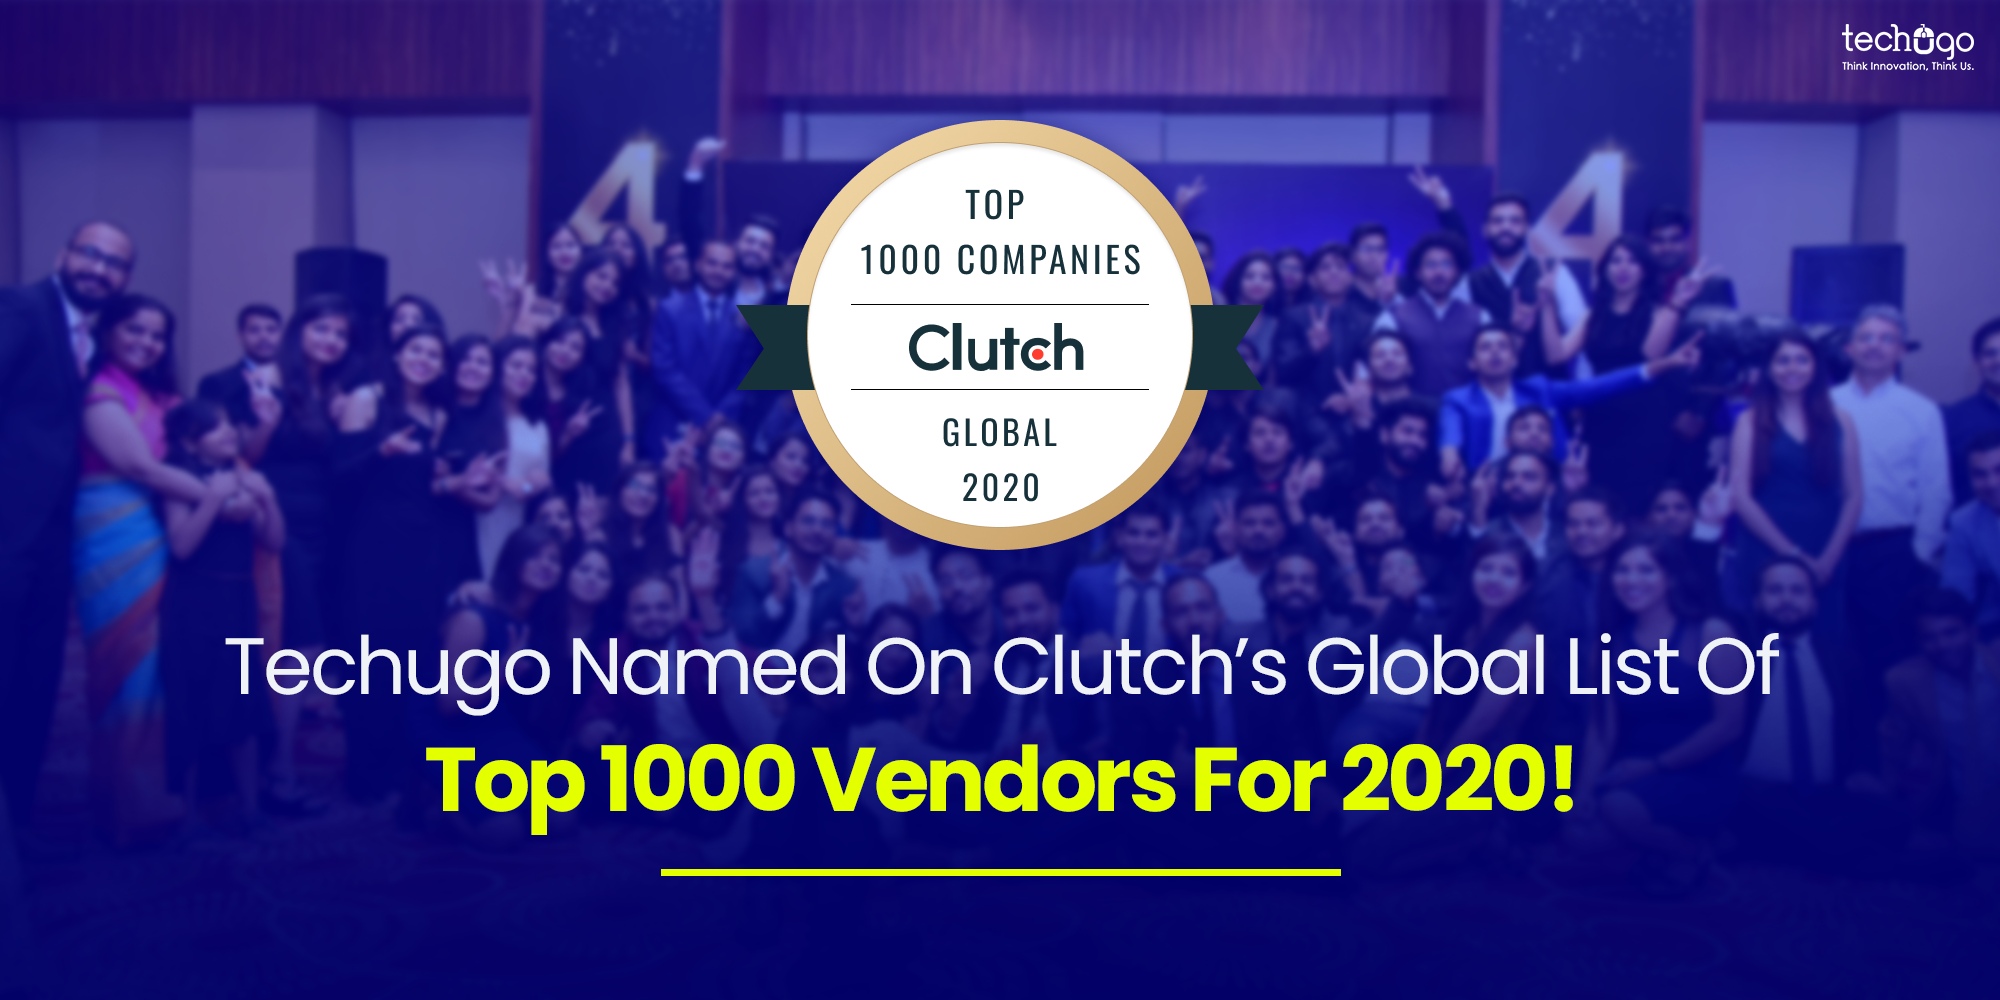 Techugo Named On Clutch’s Global List Of Top 1000 Vendors For 2020!